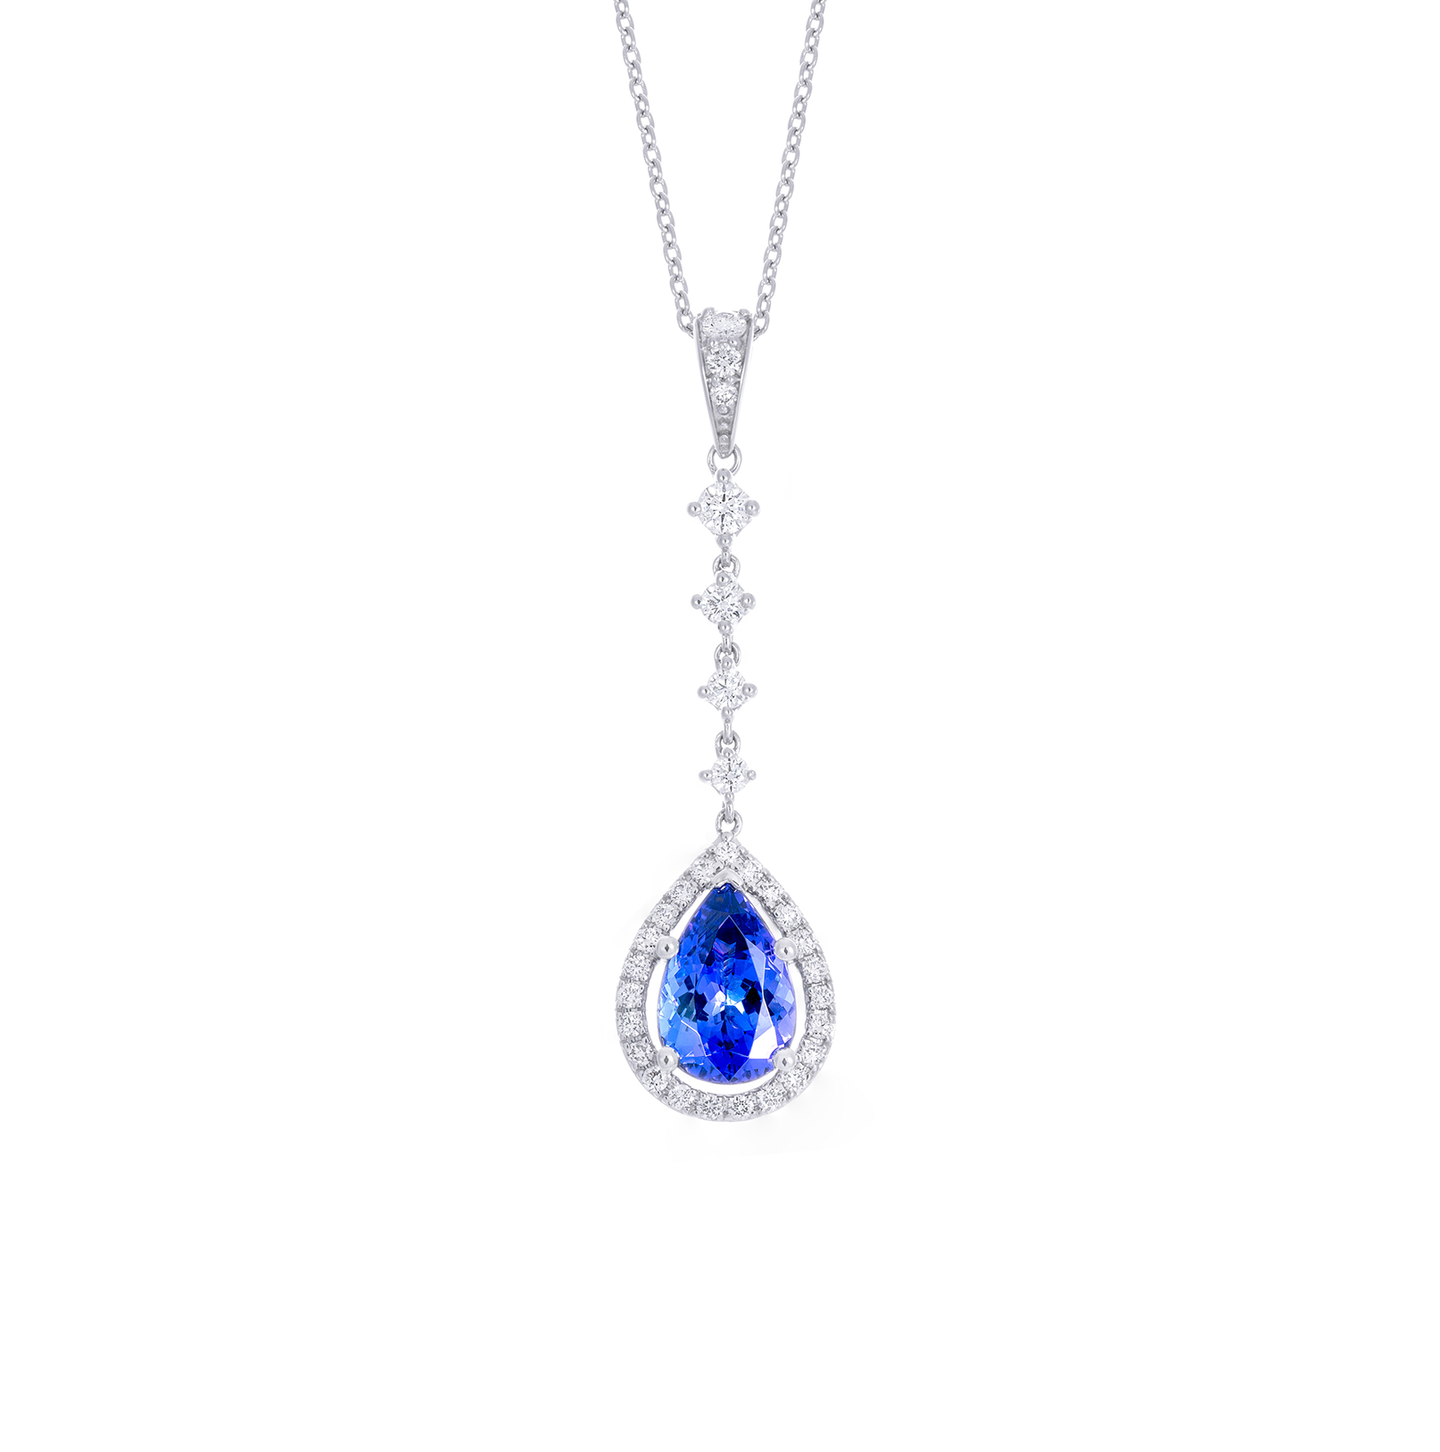 Sabel Collection White Gold Tanzanite Teardrop Pendant Necklace with Diamonds